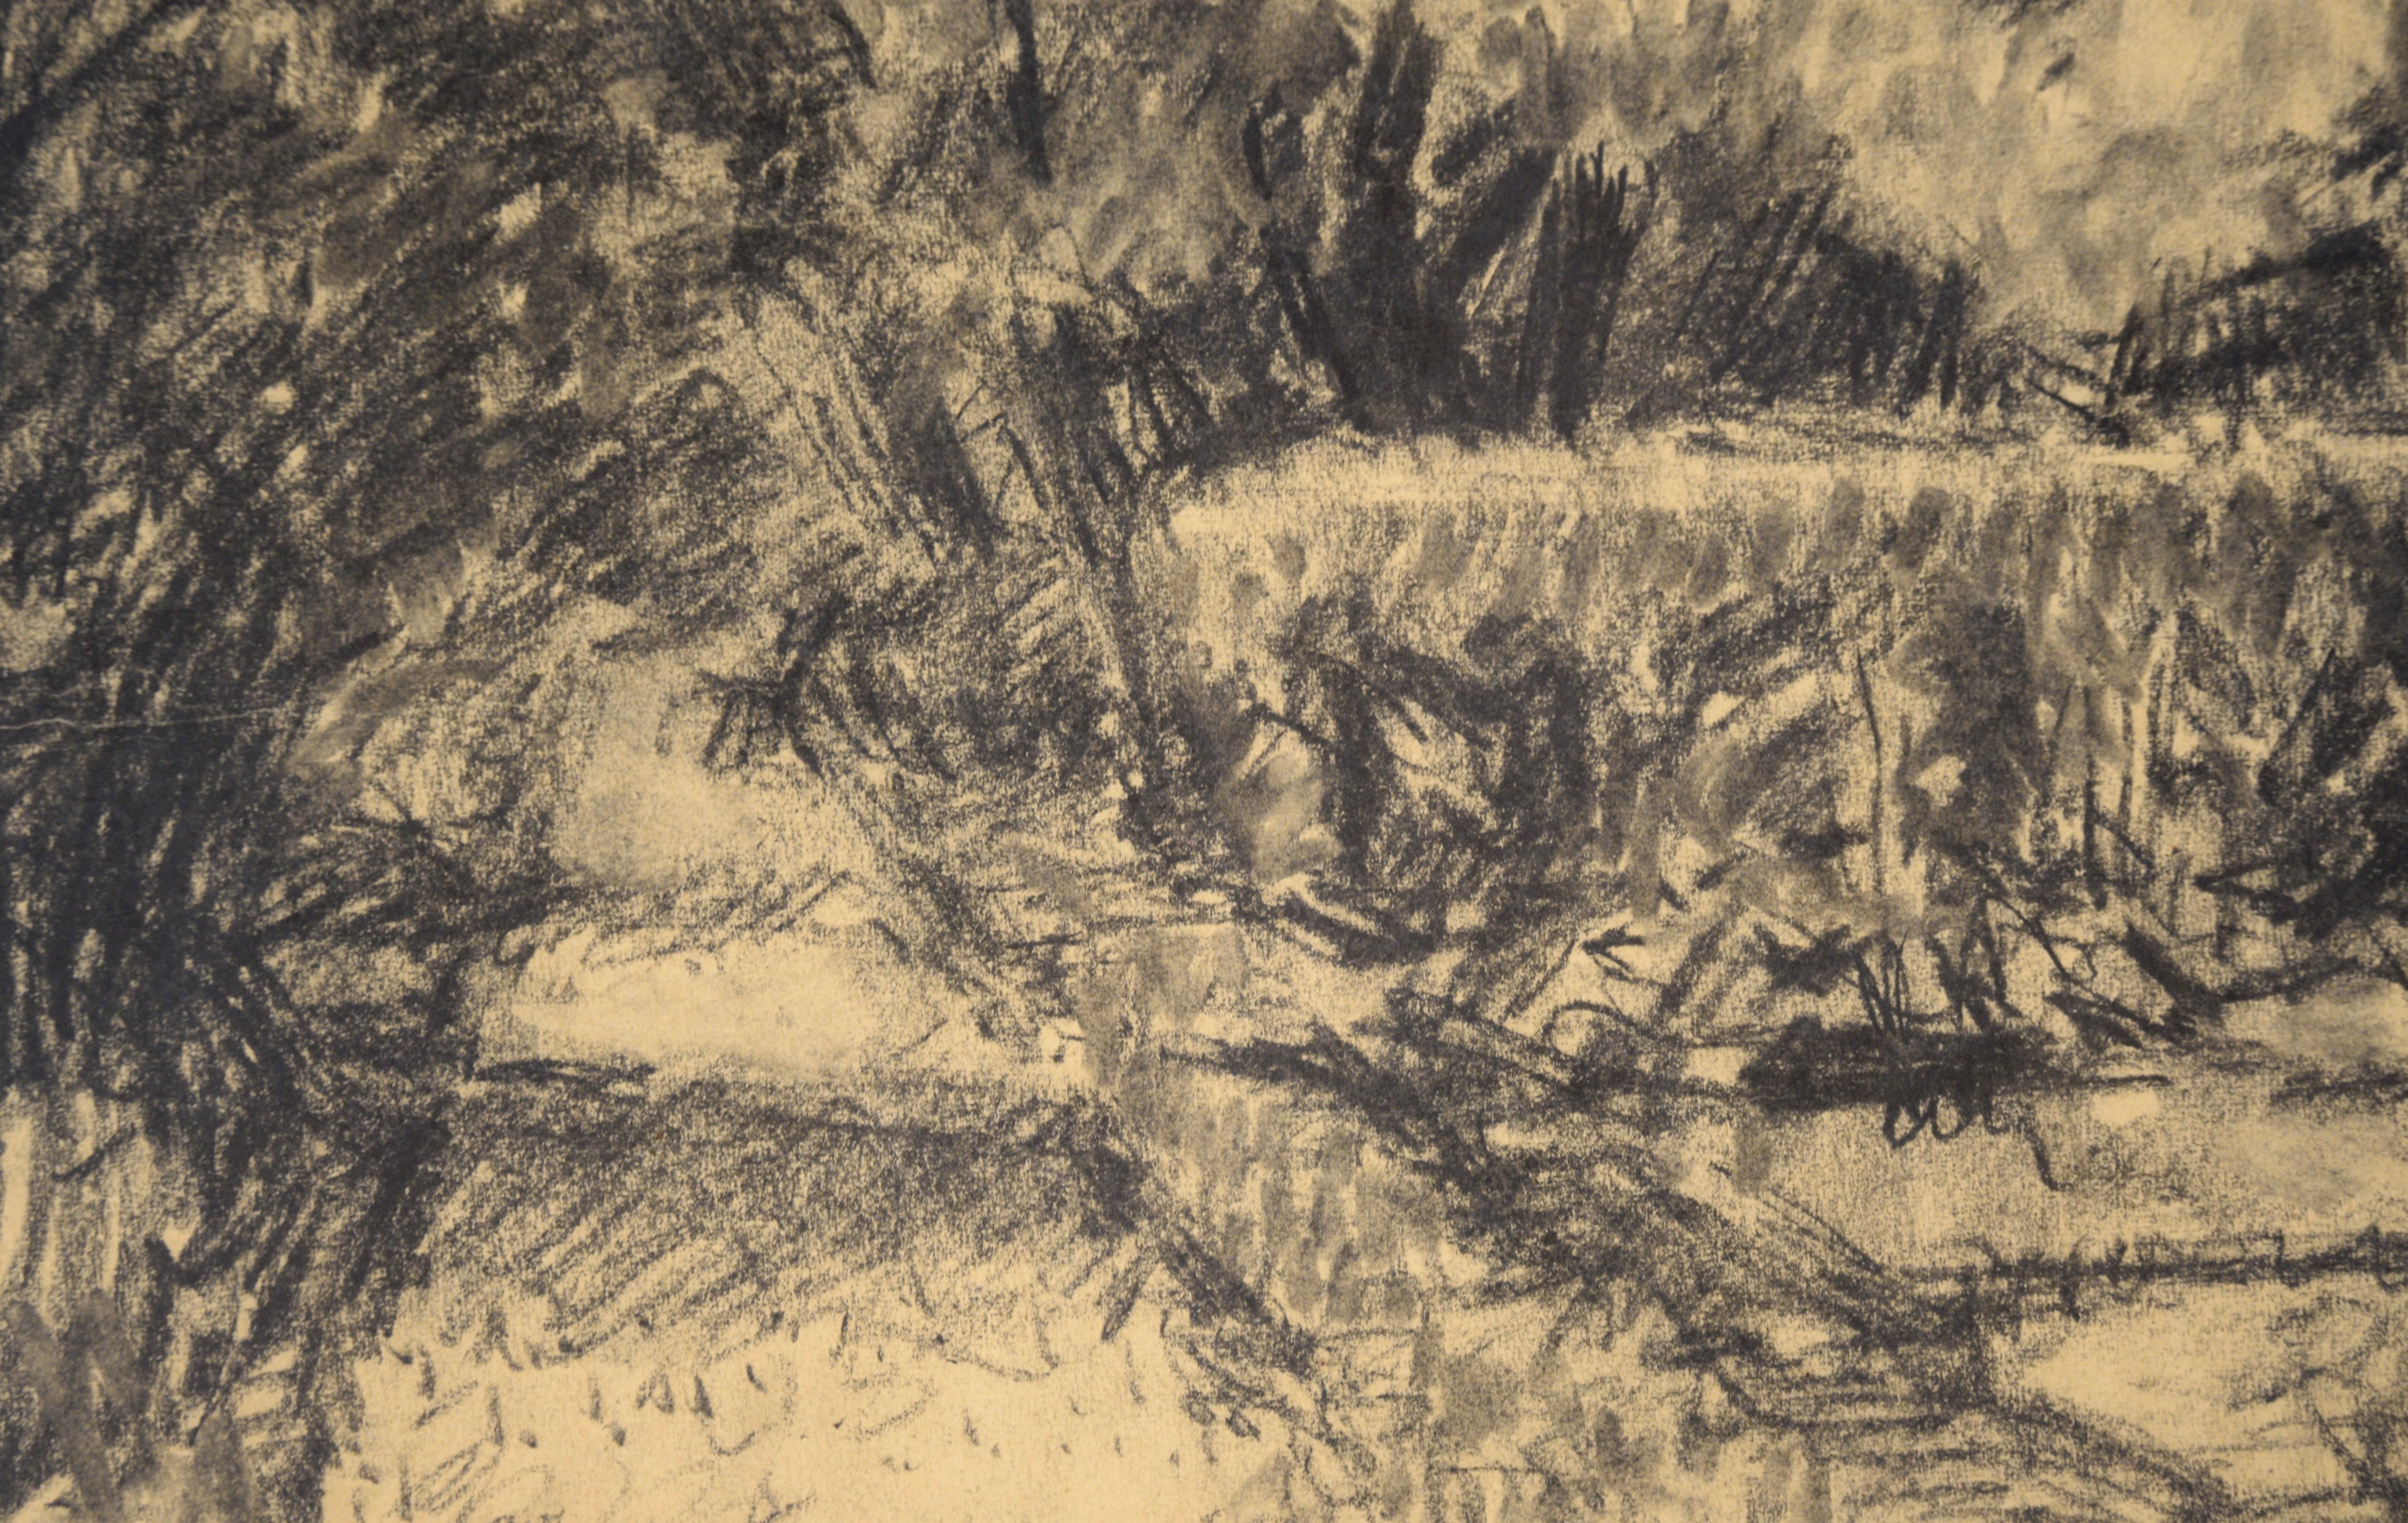 Blooming Apple Tree on Union Street - Finnish Landscape in Charcoal on Paper - Impressionist Art by Otto Makila